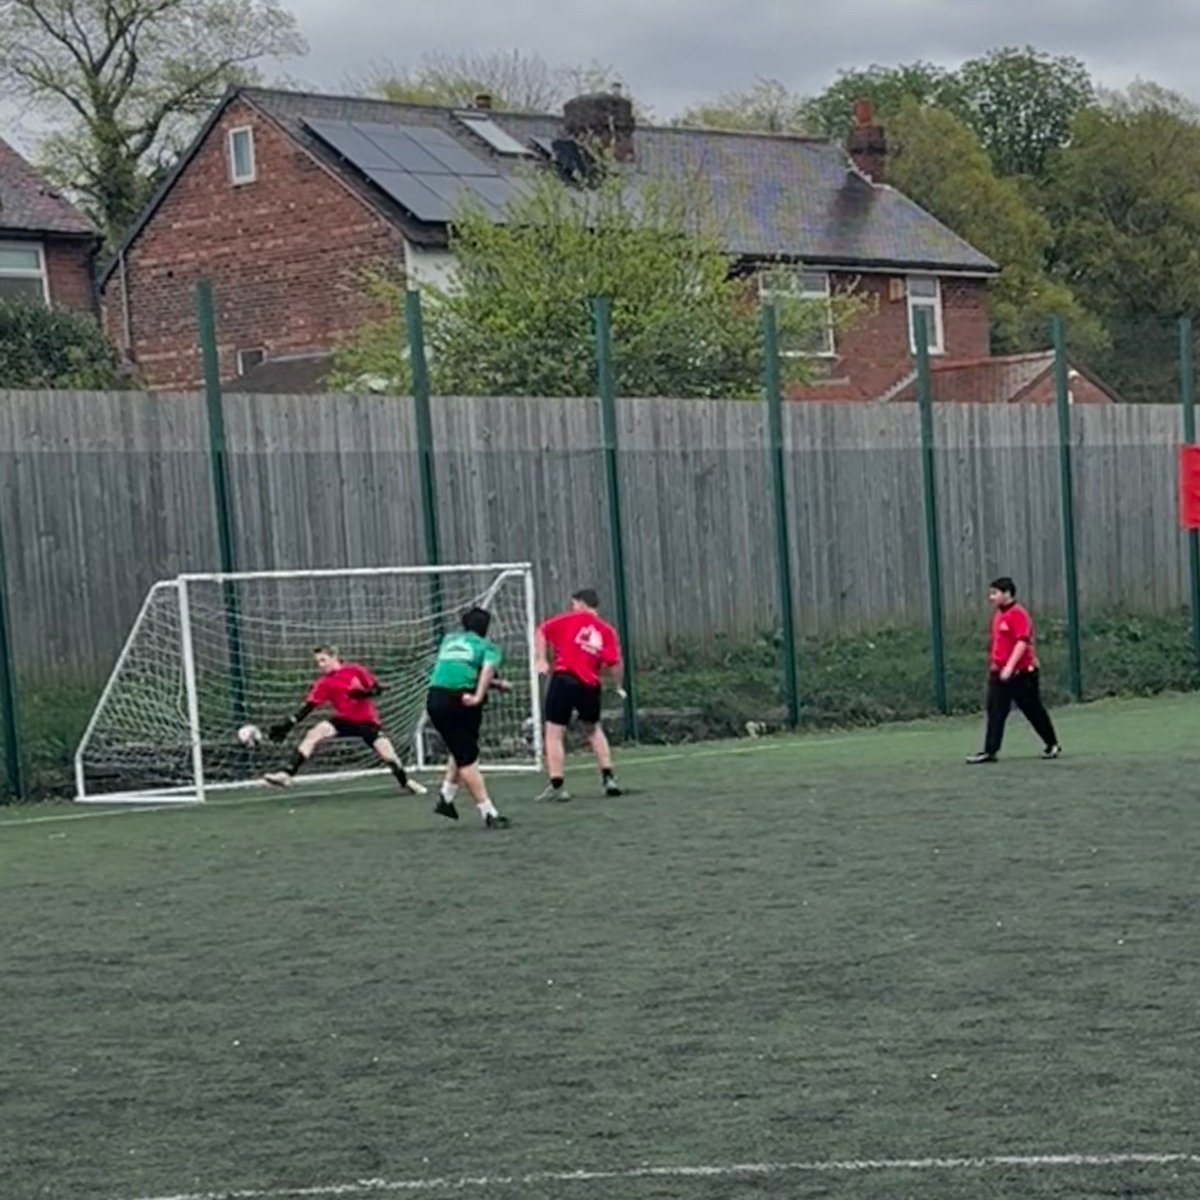 Well done to our Year 8 footballers, who competed in yesterday's House Tournament - especially Sagarmatha who took the lead! 💚 All of our players represented their houses so well - thank you for all of your effort and dedication ⚽ #OpportunityToSucceed #Community